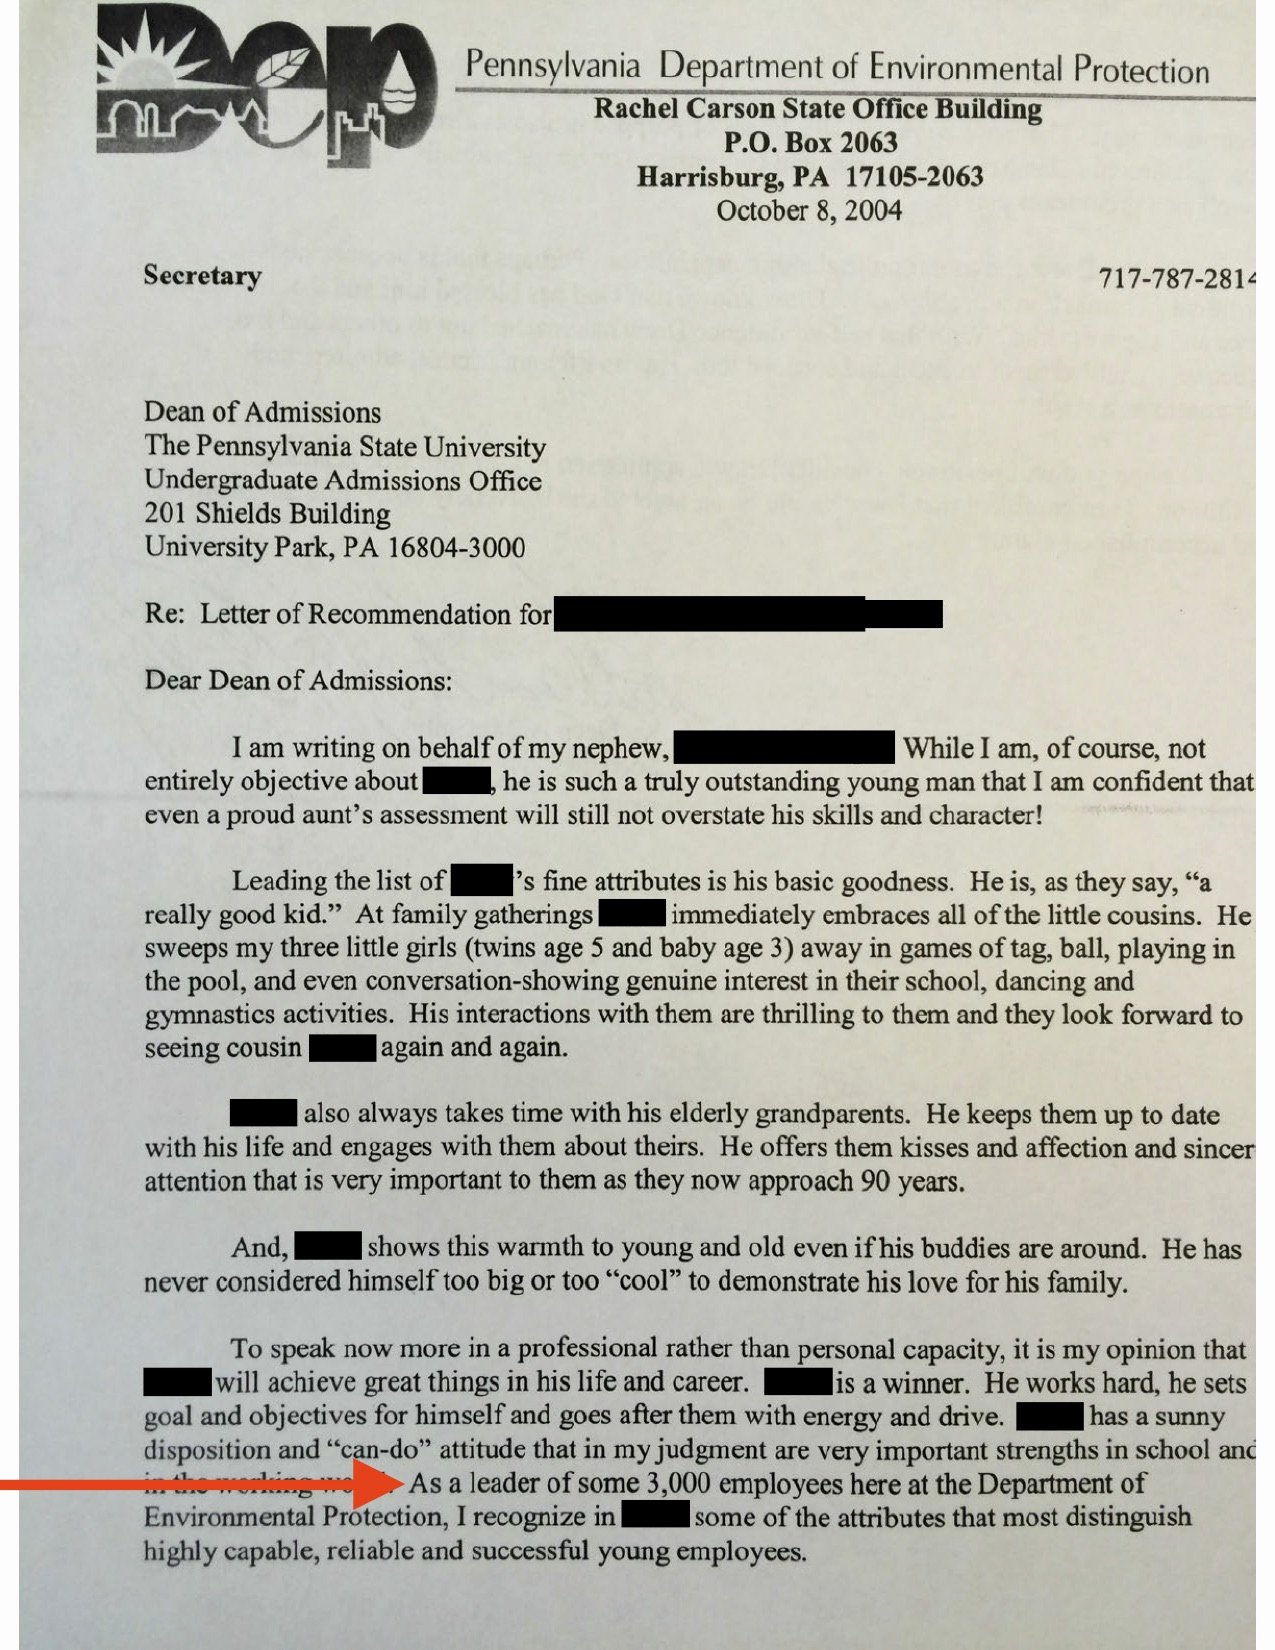 Pa Letter Of Recommendation Example Luxury Pa Cabinet Official Mcginty Used State Letterhead while